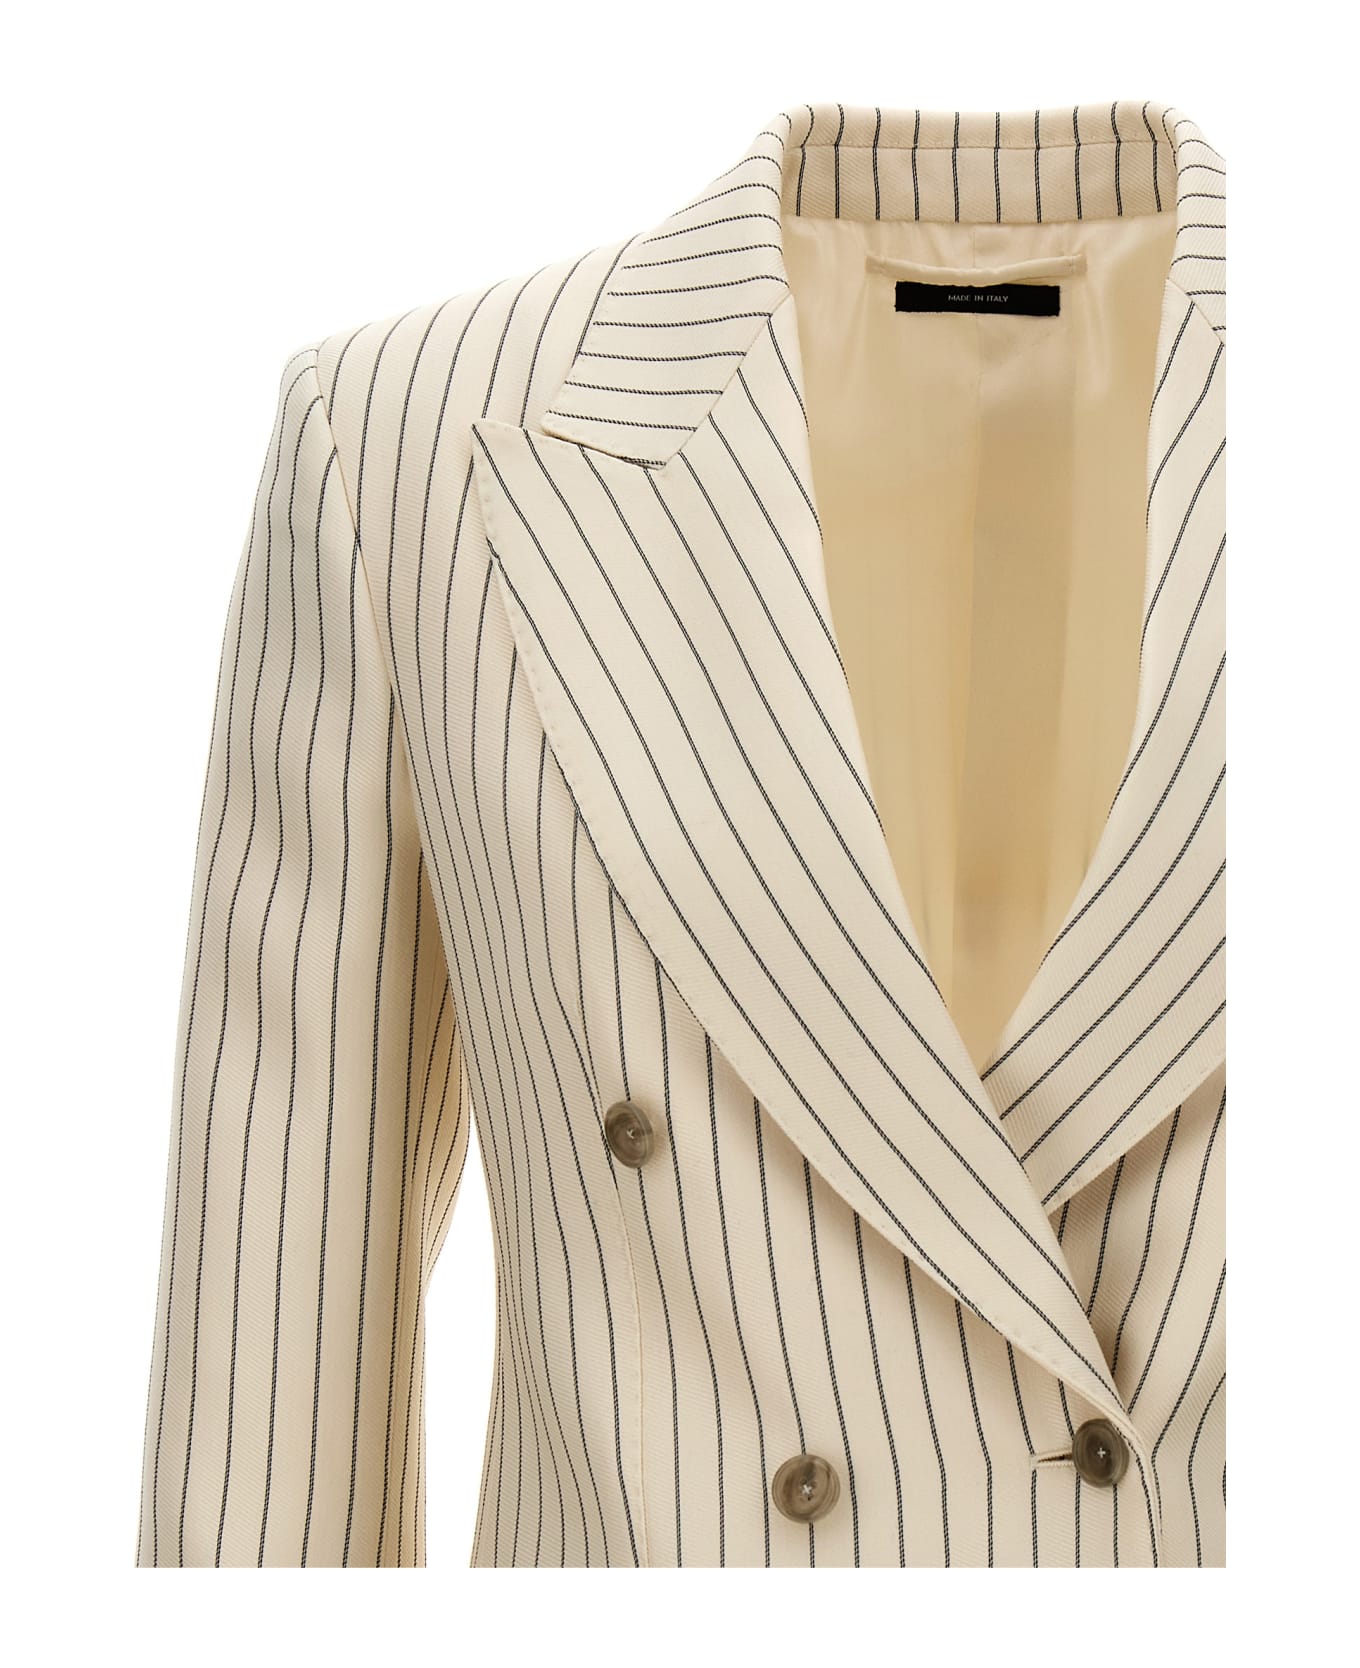 Tom Ford Striped Double-breasted Blazer - White/Black